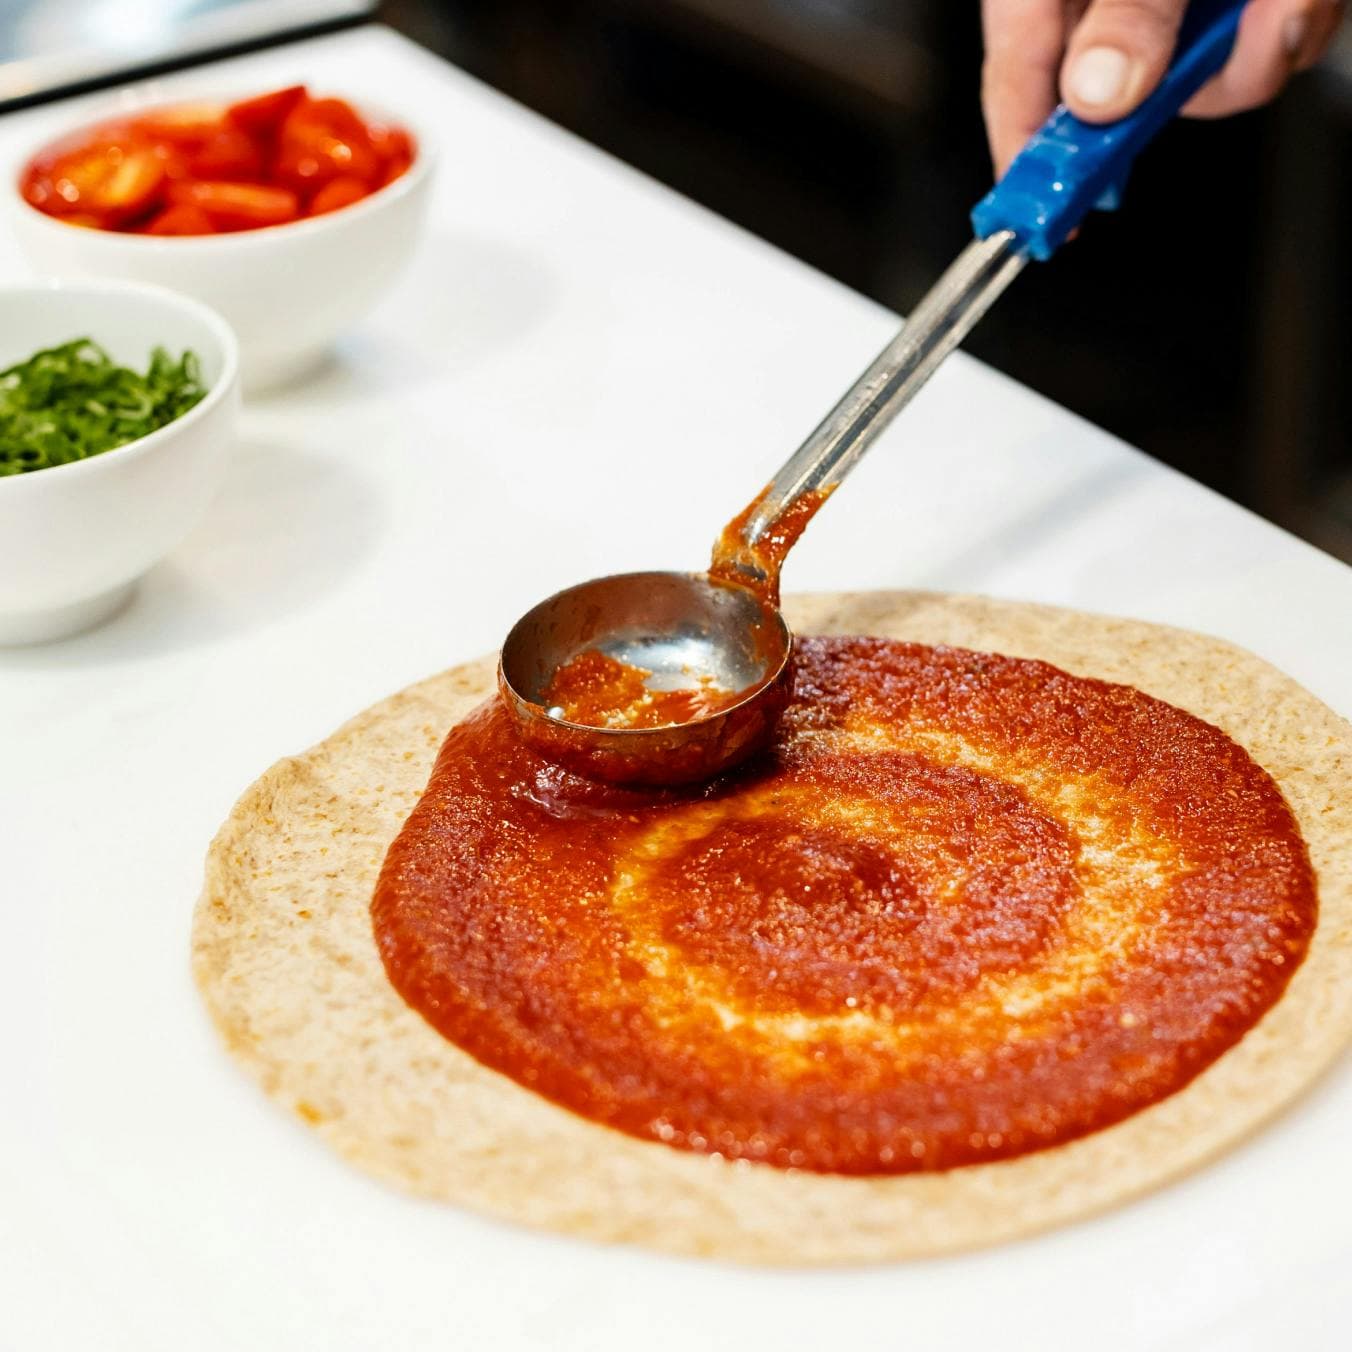 sauce being spread on pizza